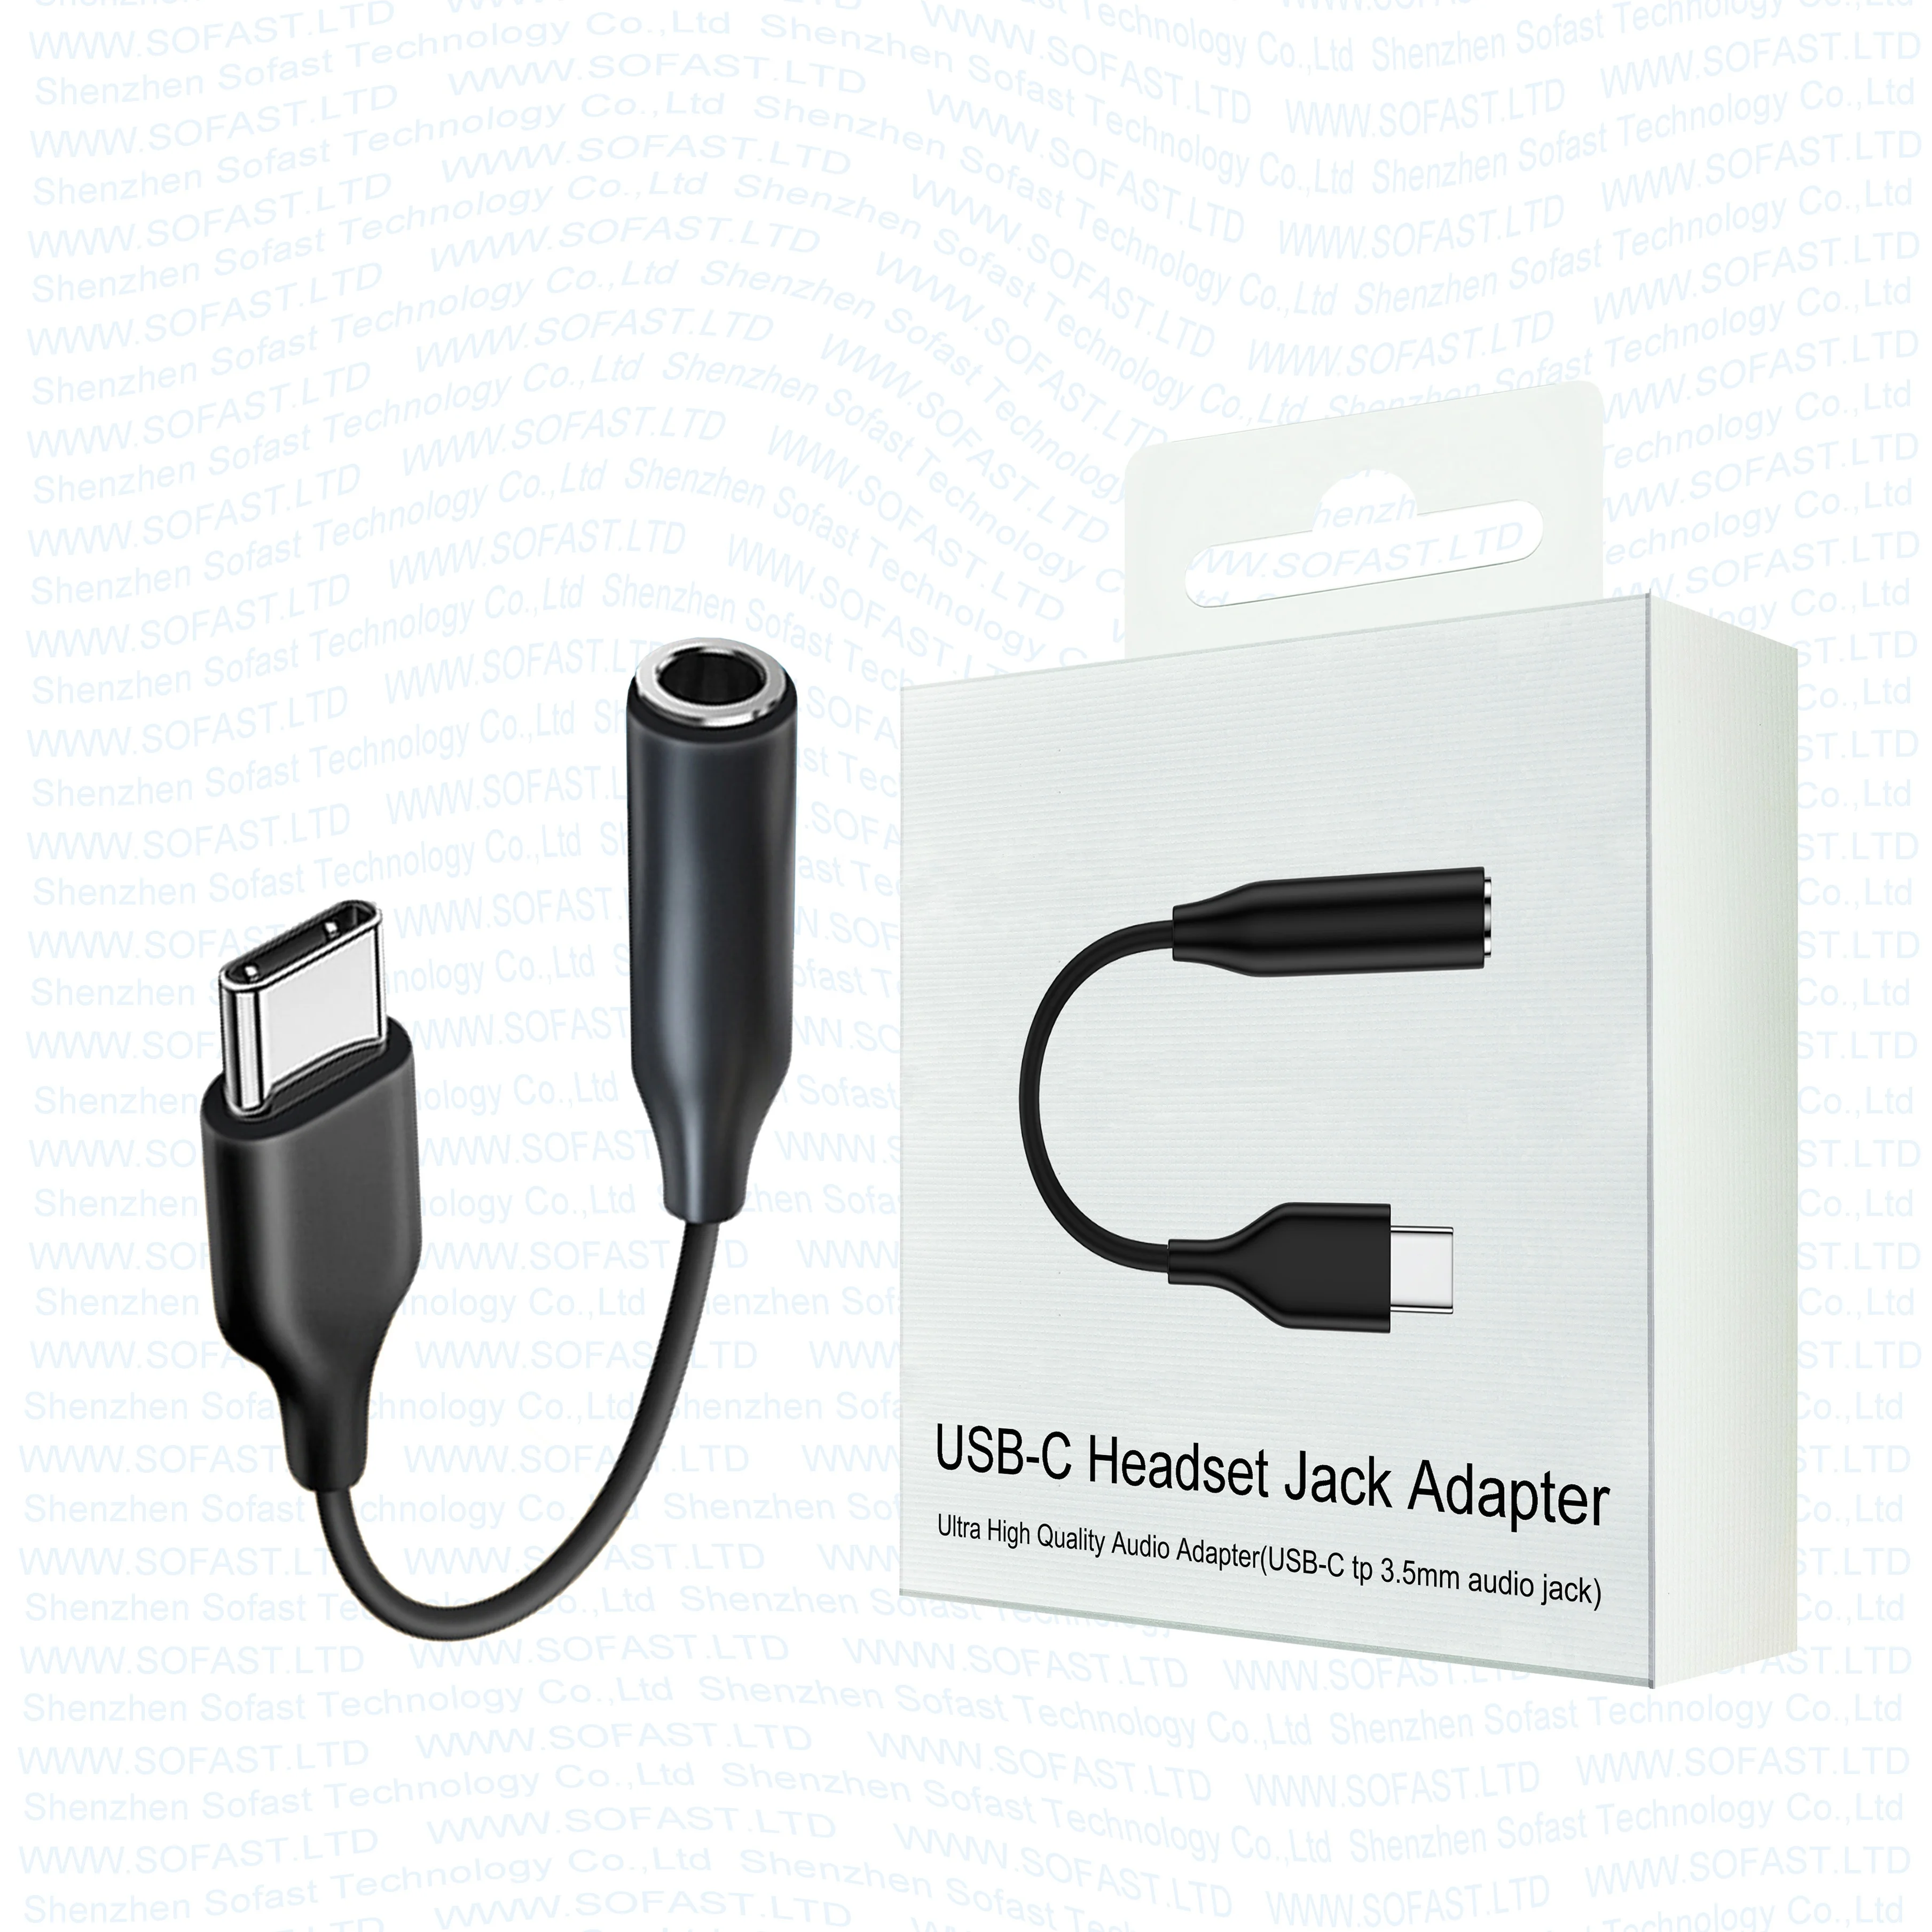 Original quality USB C headset adapter audio adapter for s10 s9 usb-c to 3.5mm audio jack From m.alibaba.com